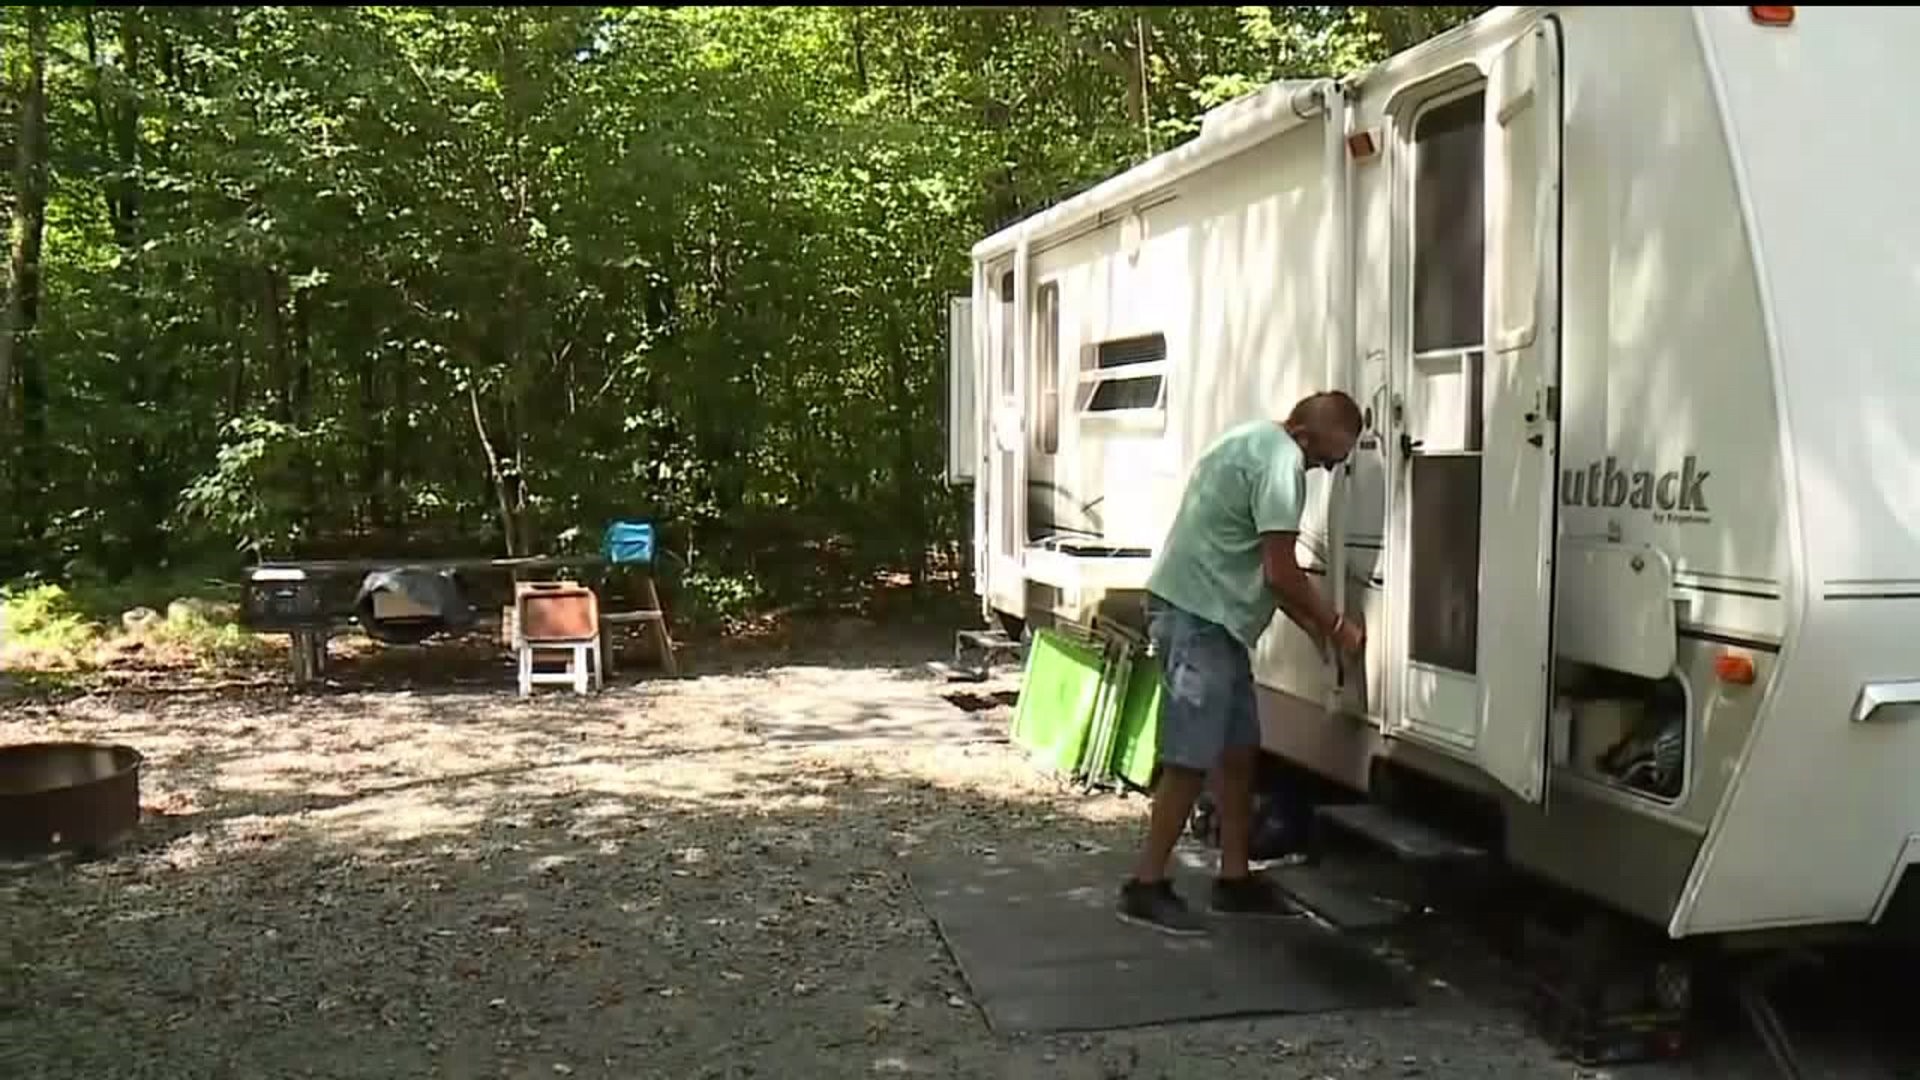 Campers Rolling in Early for Labor Day Weekend in the Poconos